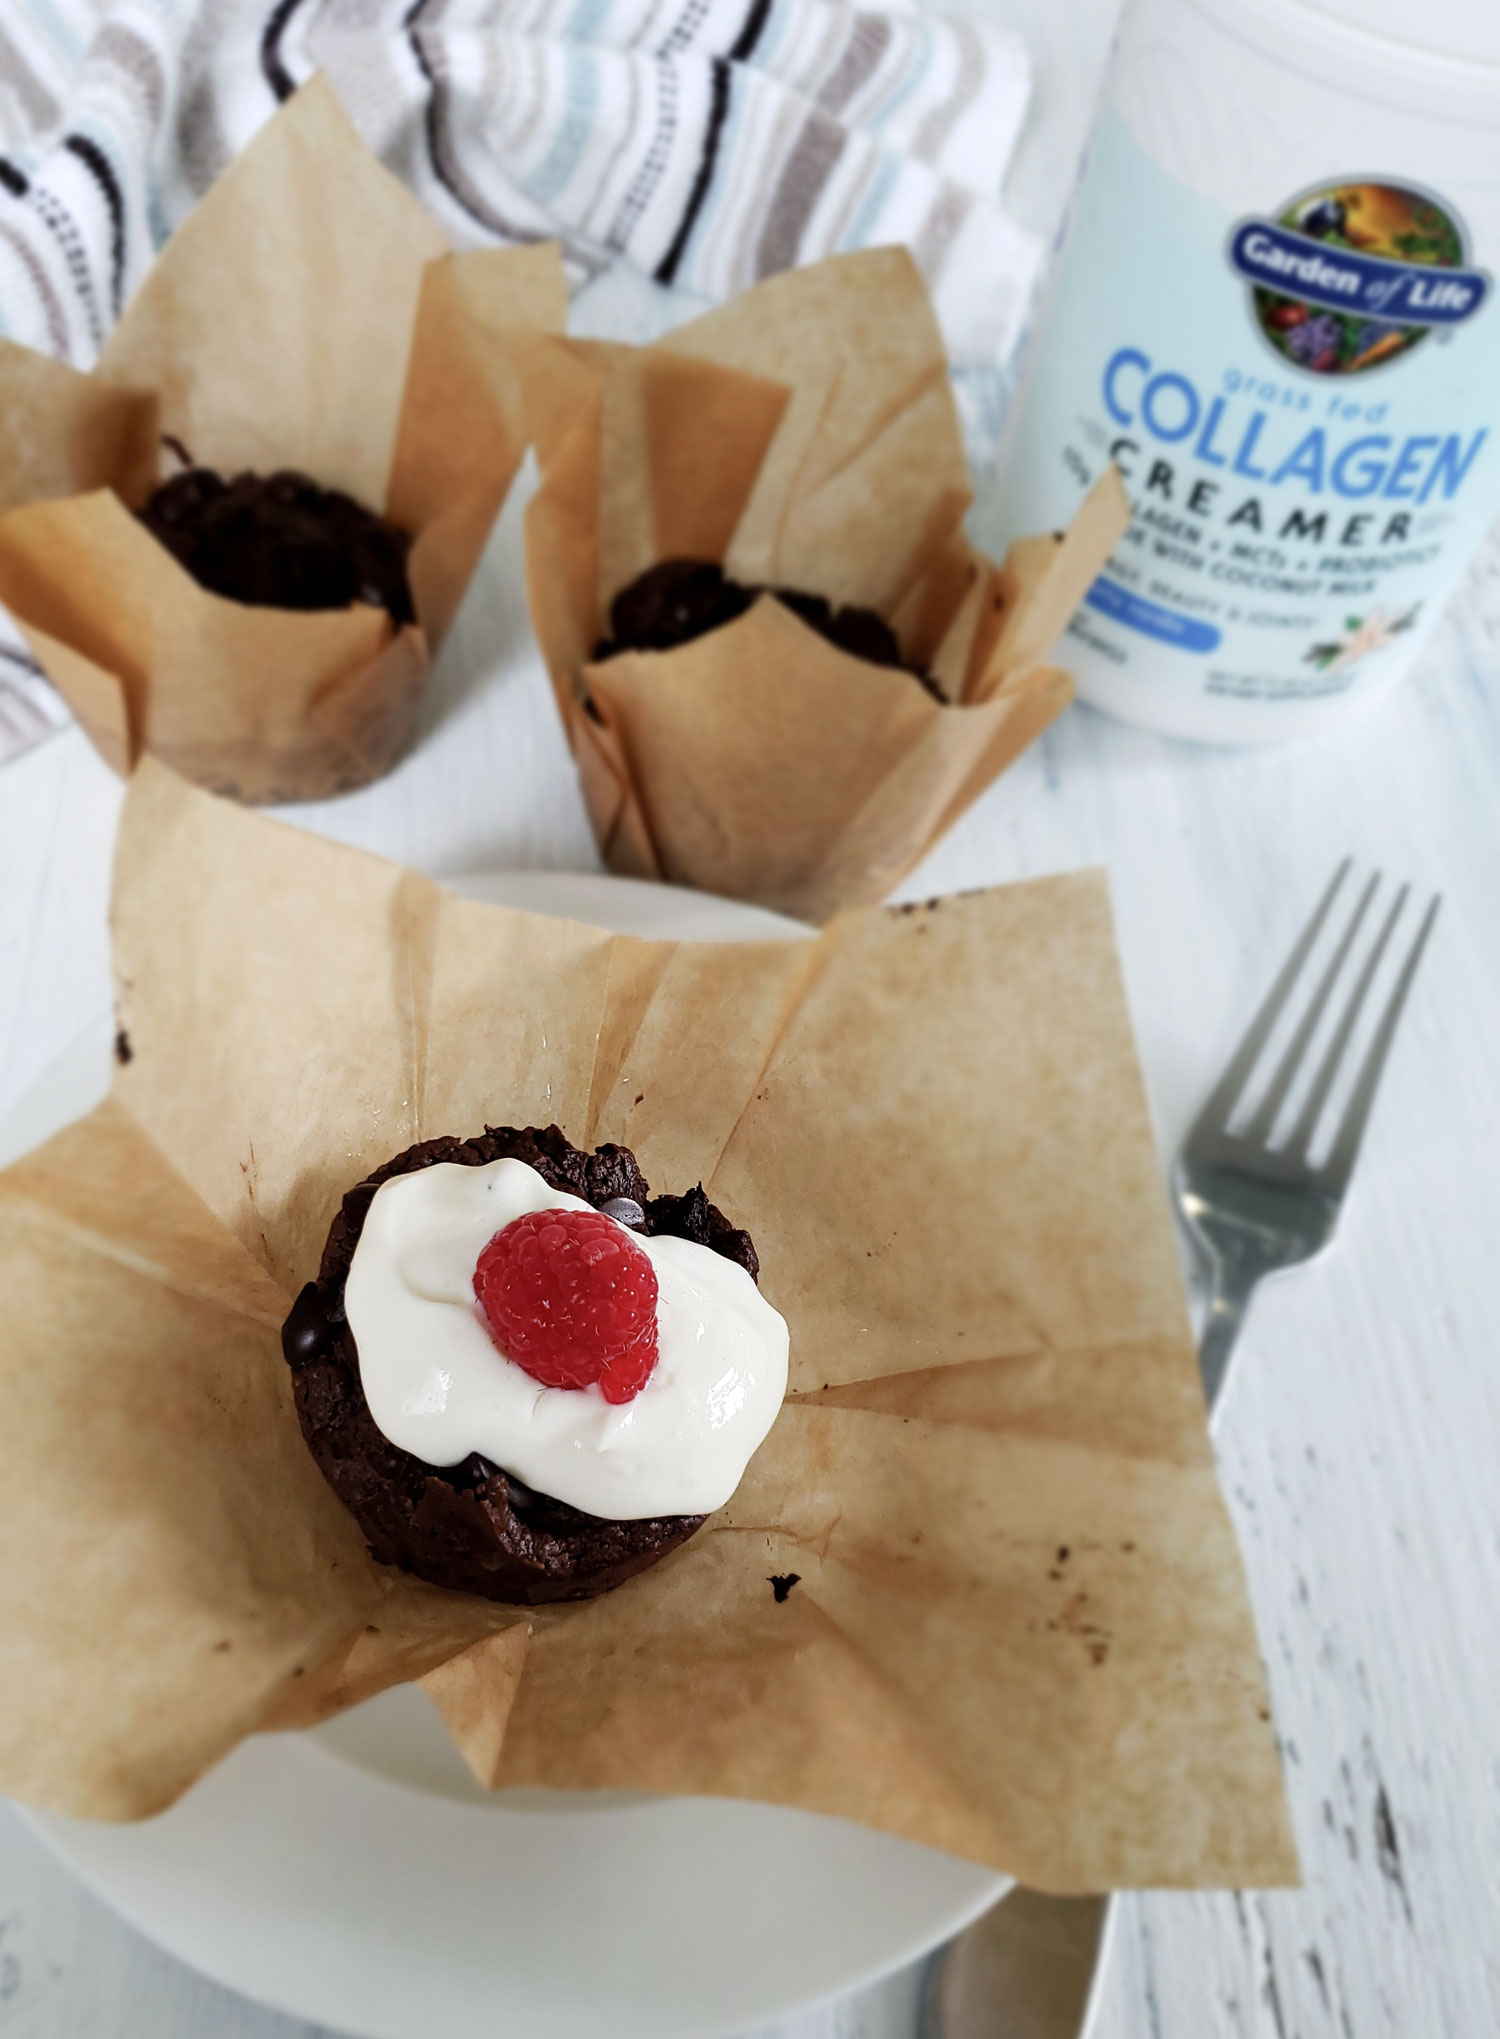 double chocolate chip cupcakes with Garden of Life Grass Fed Collagen and Greek Yogurt topping garnished with a red raspberry.